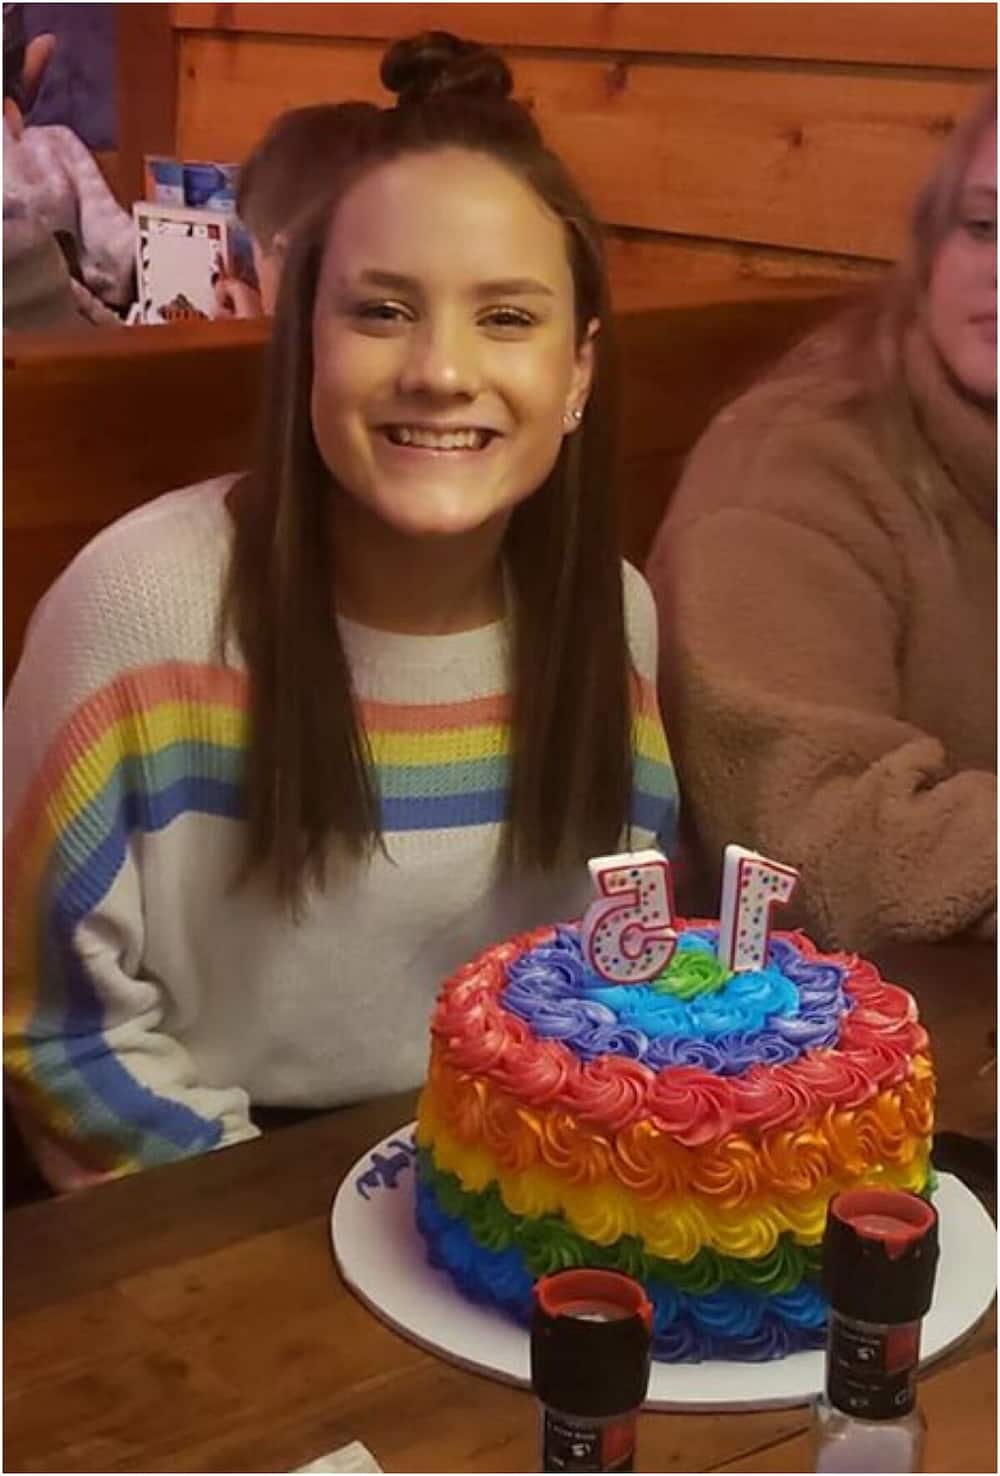 Christian school expels teen after she posed with rainbow birthday cake, mother says